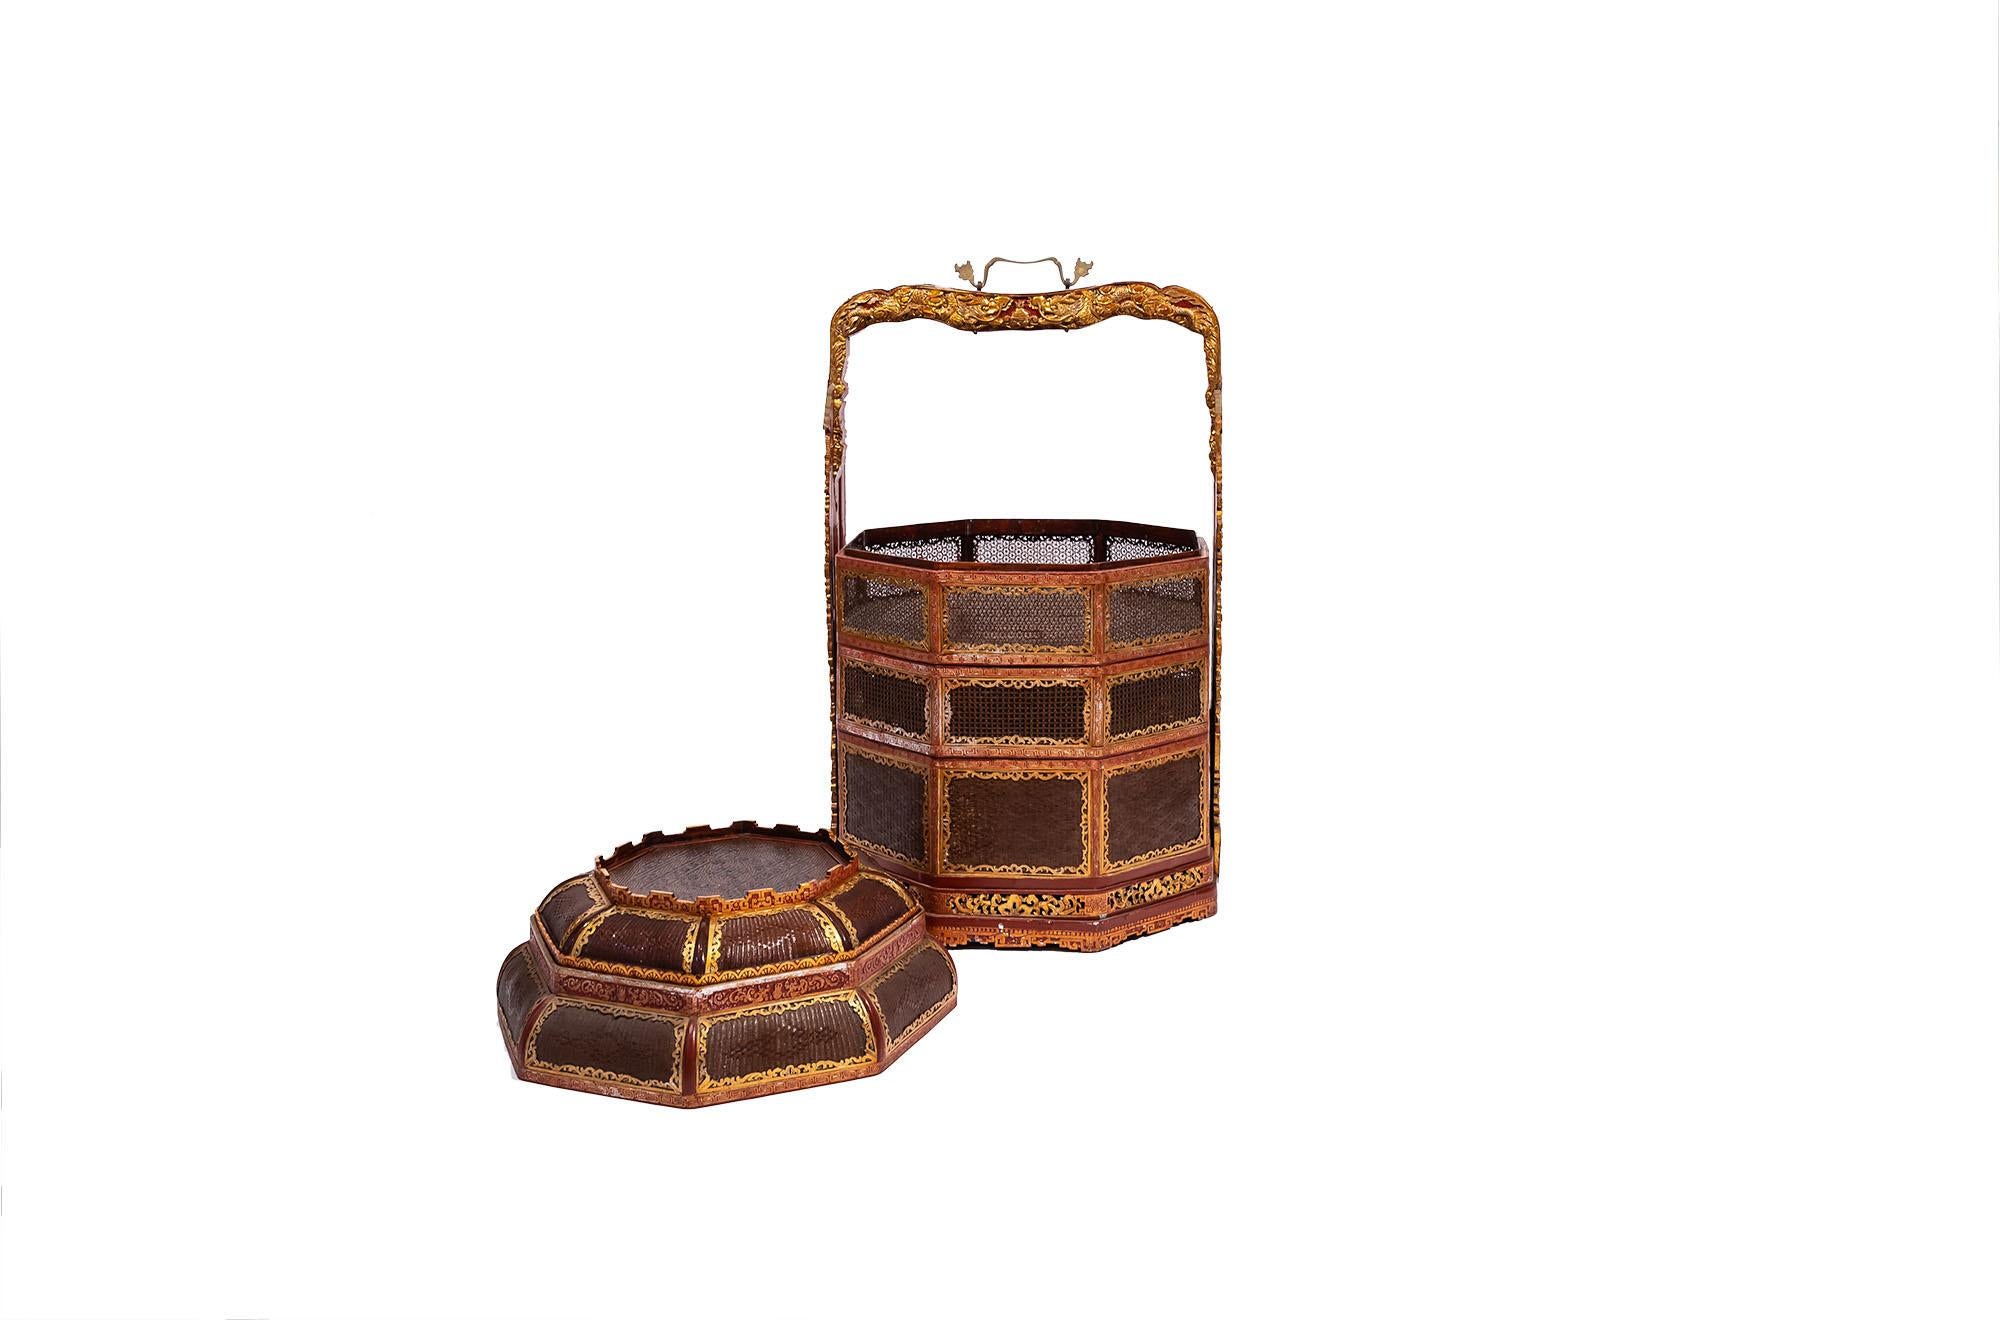 Gilt Set of Four Baskets, Lacquered Wood, Gilded Brass, China, circa 1970